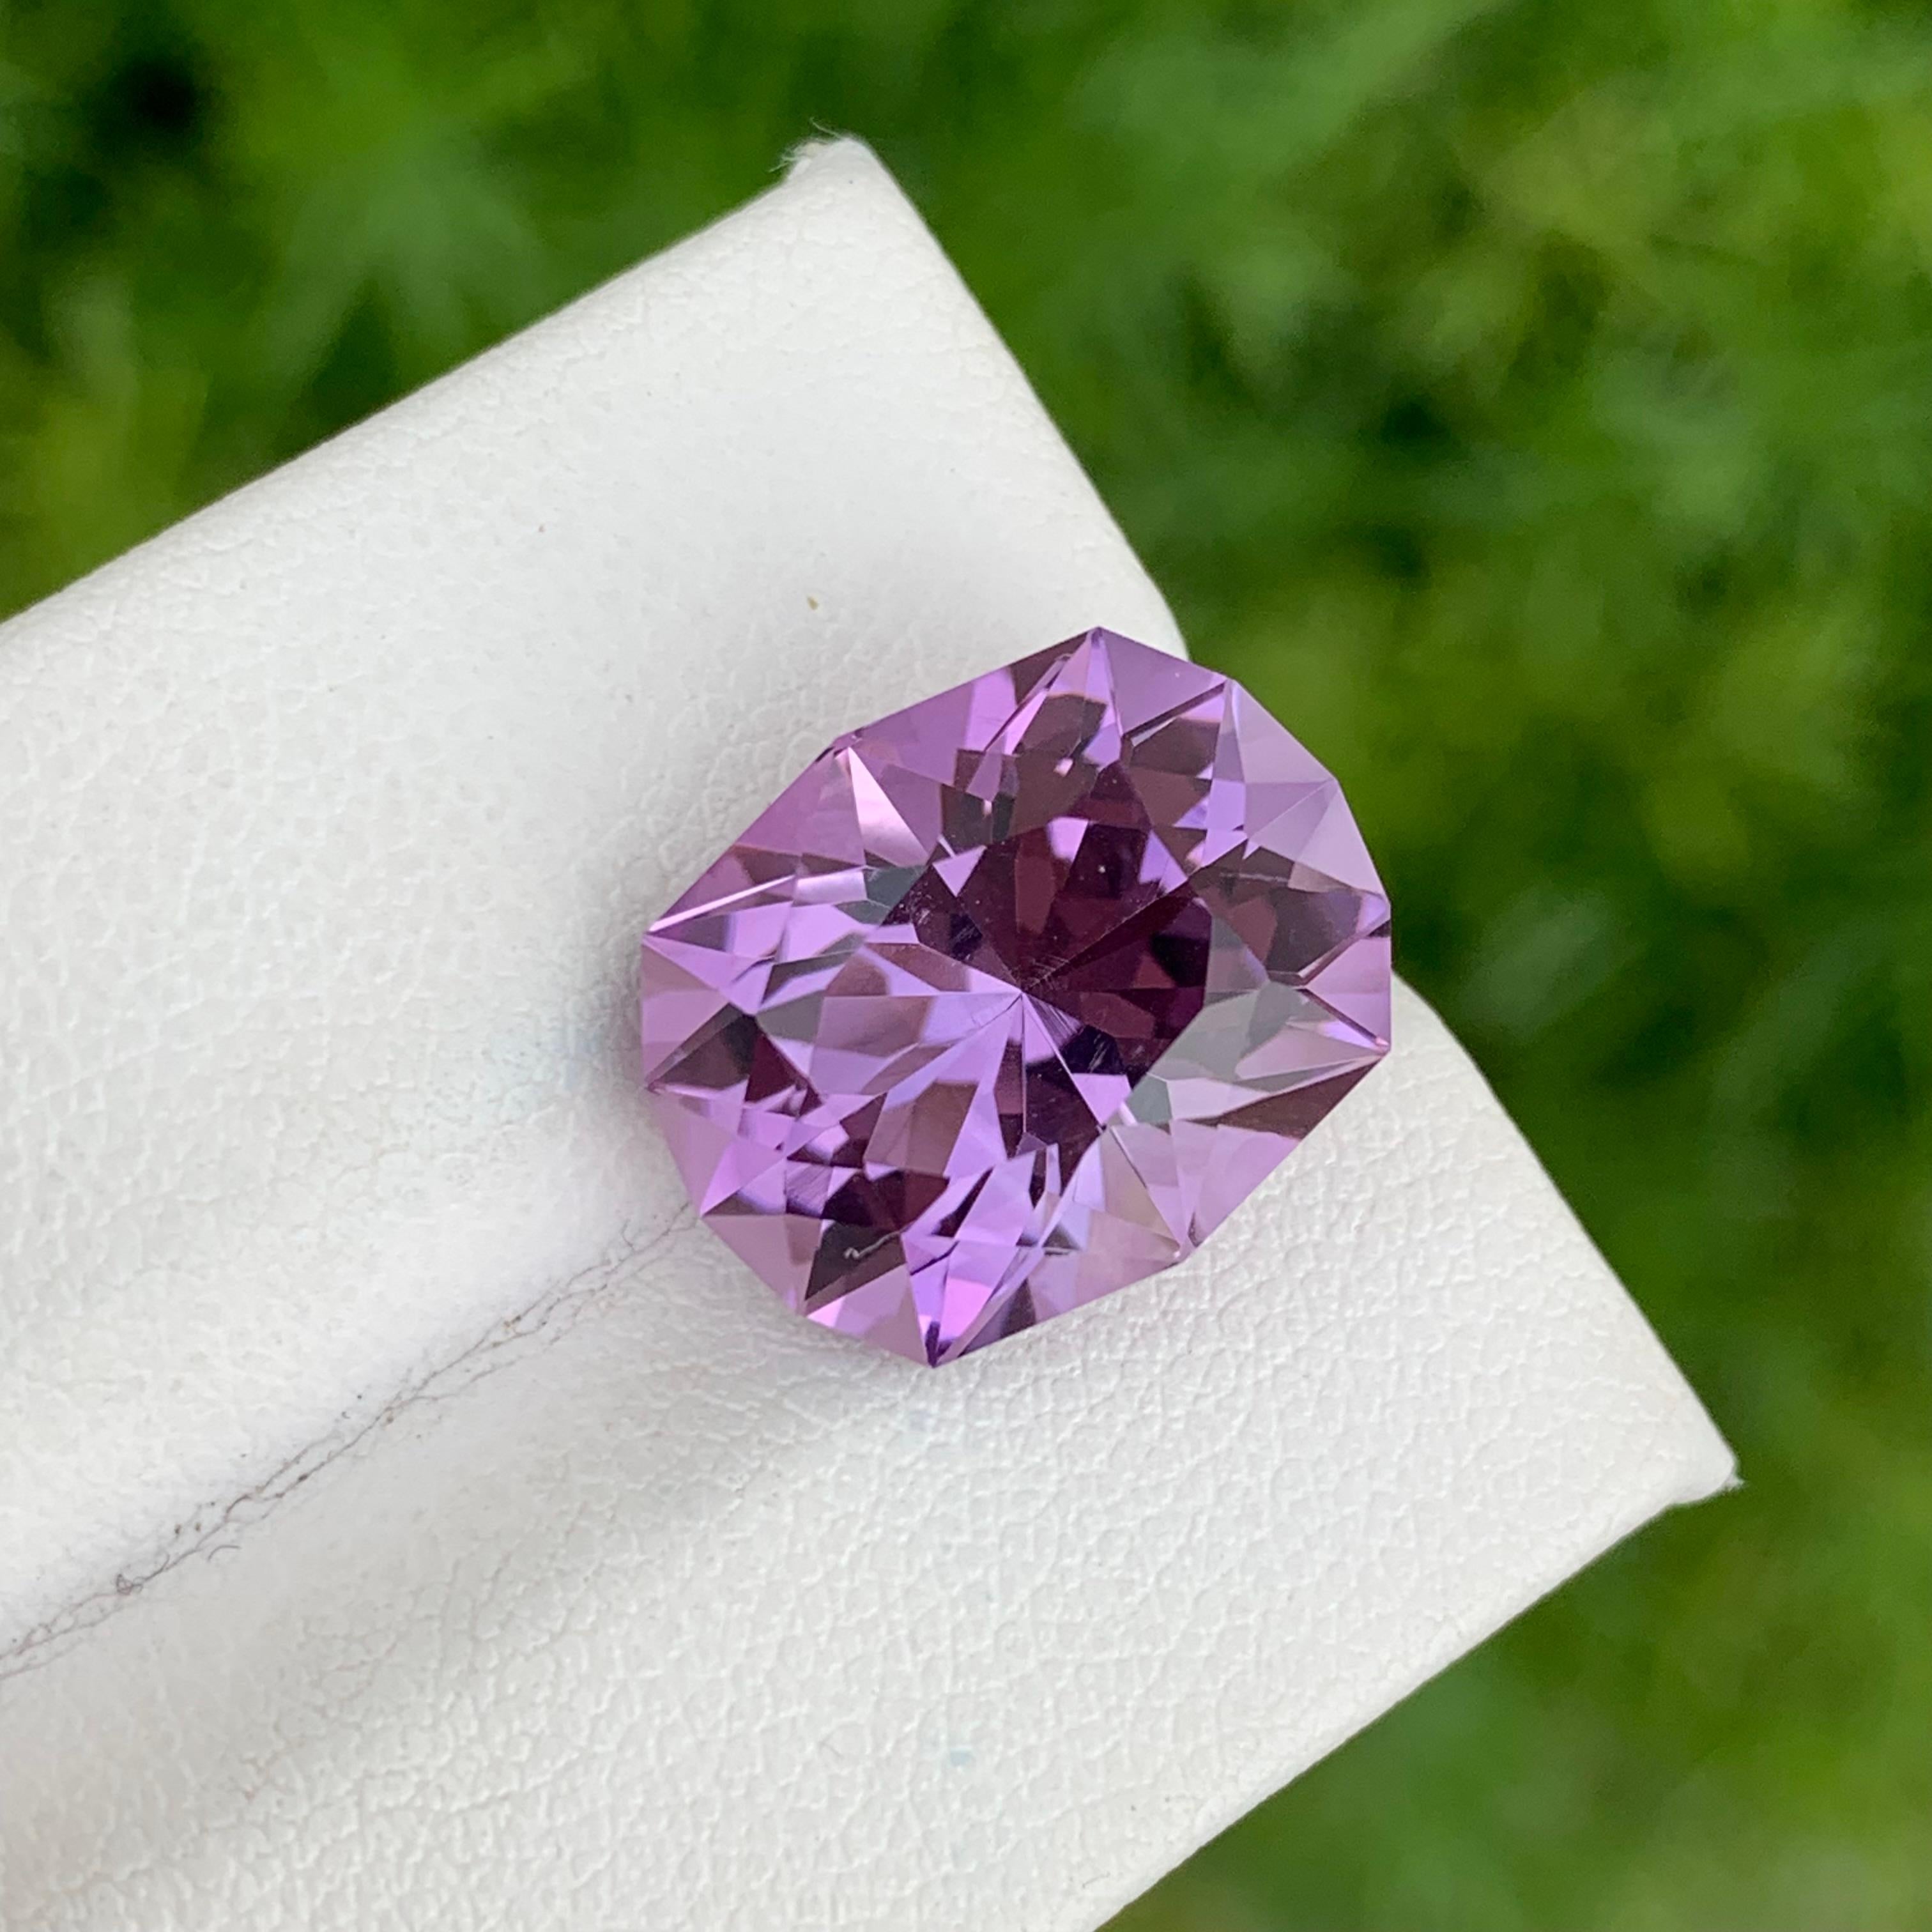 Antique Cushion Cut Alluring Beauty 9.65 Carat Fancy Cut Natural Loose Amethyst from Brazil For Sale